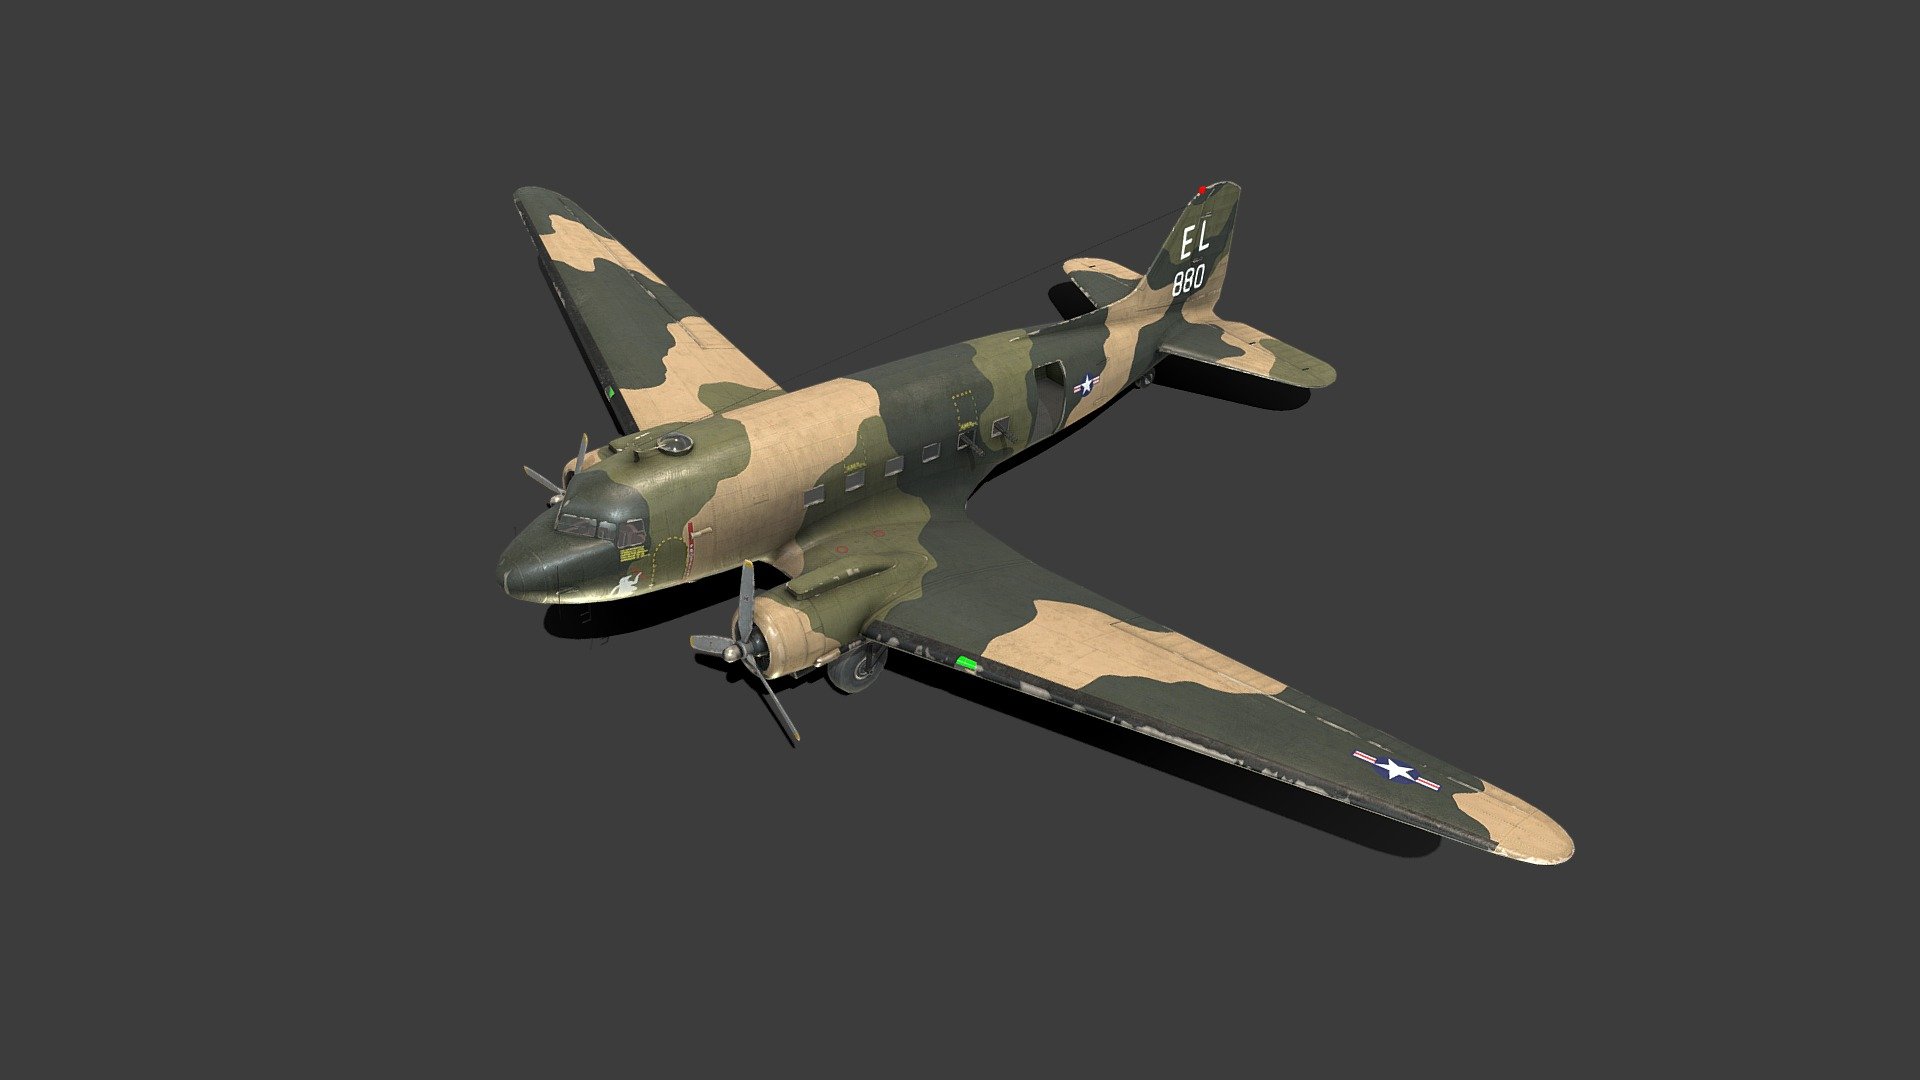 Douglas AC-47 Spooky Gunship



Low-poly (10603 Tris) ready to use in games, AR/VR.

Textures are in PNG format 4096x4096 PBR metalness 1 set texture.

Available formats: OBJ, MTL, FBX.

Files unit: Centimeters

Inspect the model complete in marmoset viewer 2nd preview image.

If you need any other file format you can always request it.

All formats include materials and textures.
 - Douglas AC-47 Spooky Gunship - Buy Royalty Free 3D model by MaX3Dd 3d model